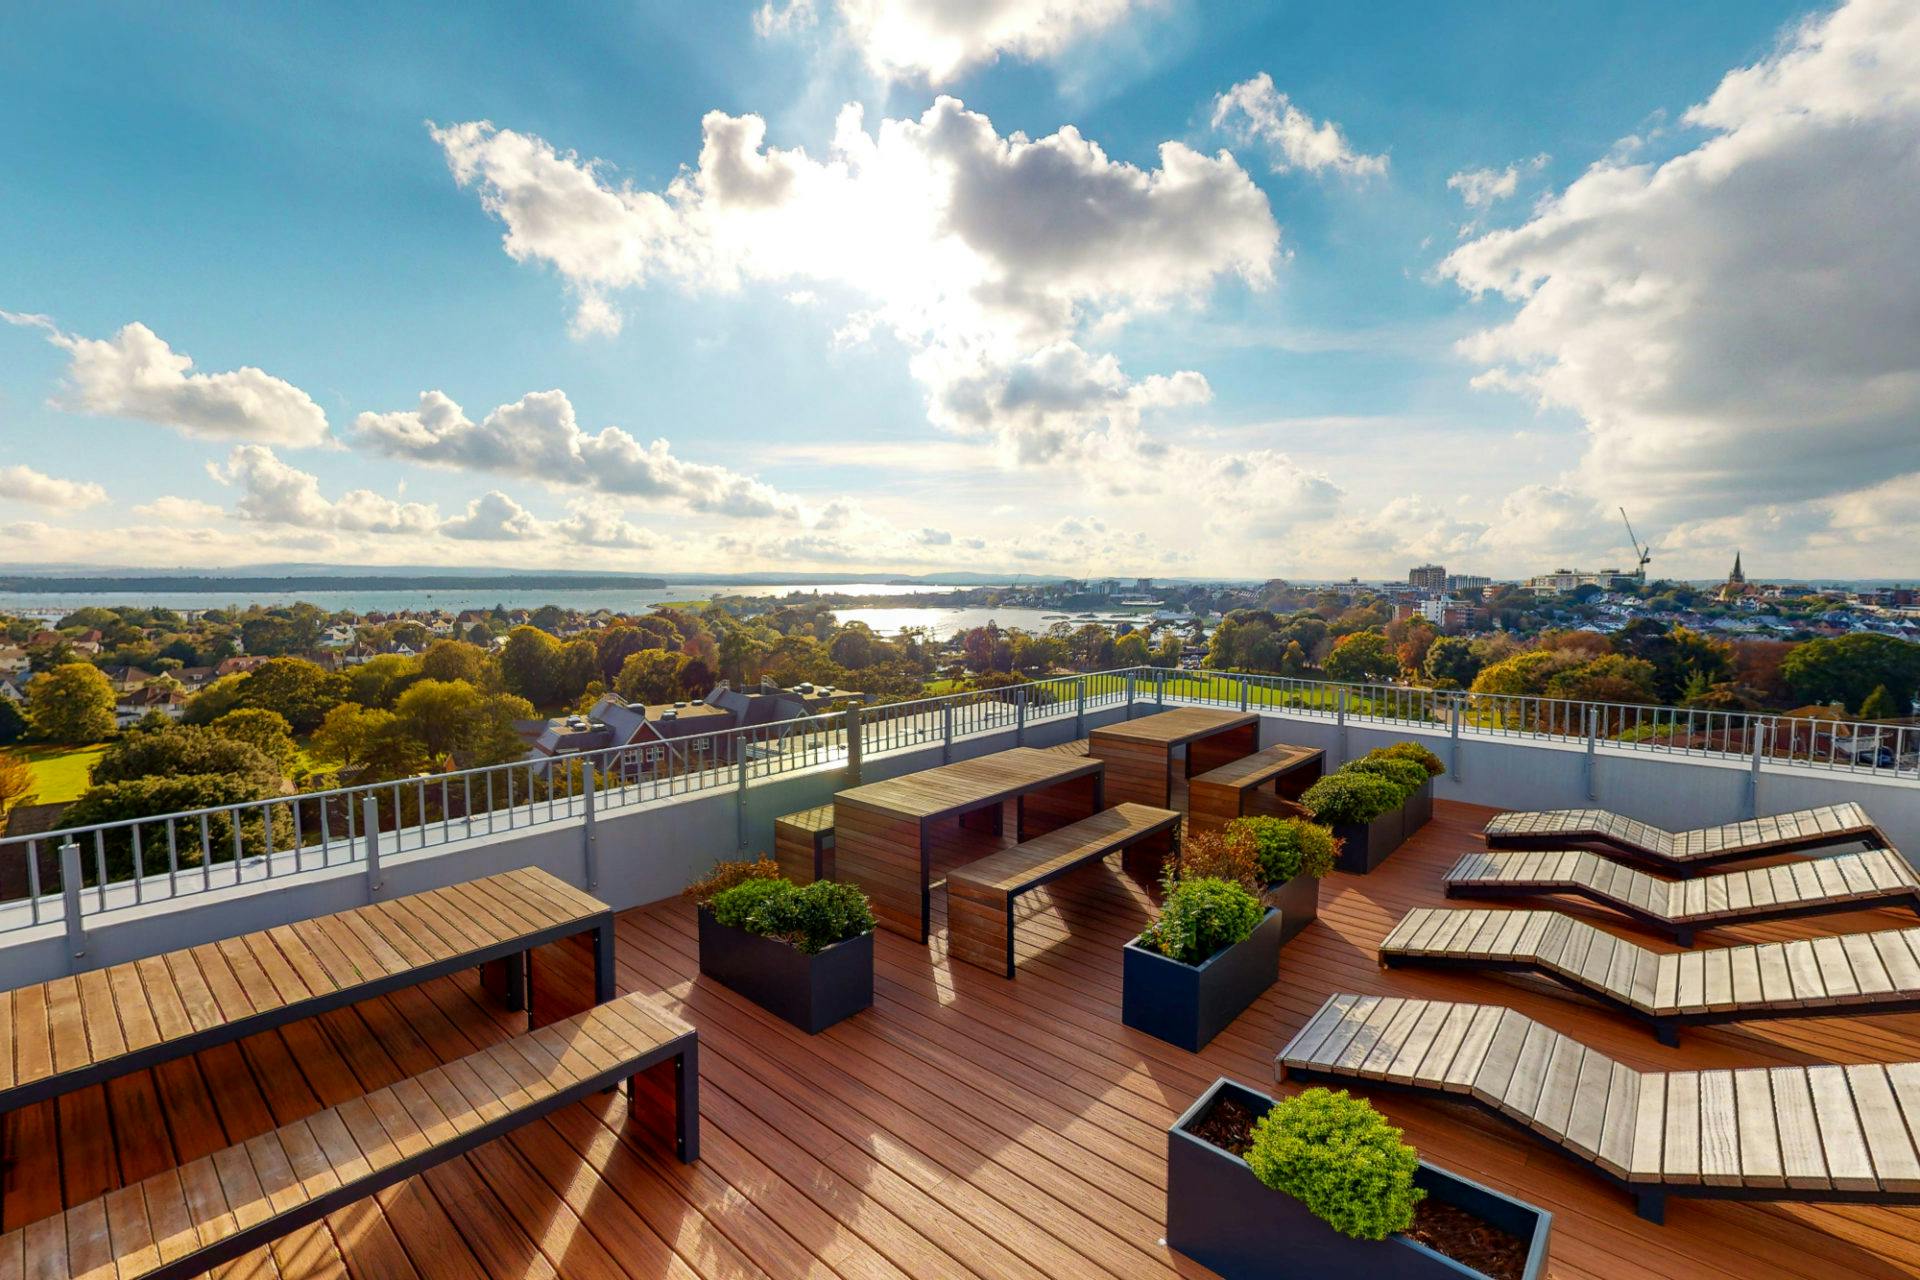 Rooftop terrace with wooden benches and planters, offering a panoramic view of a scenic landscape with a lake.